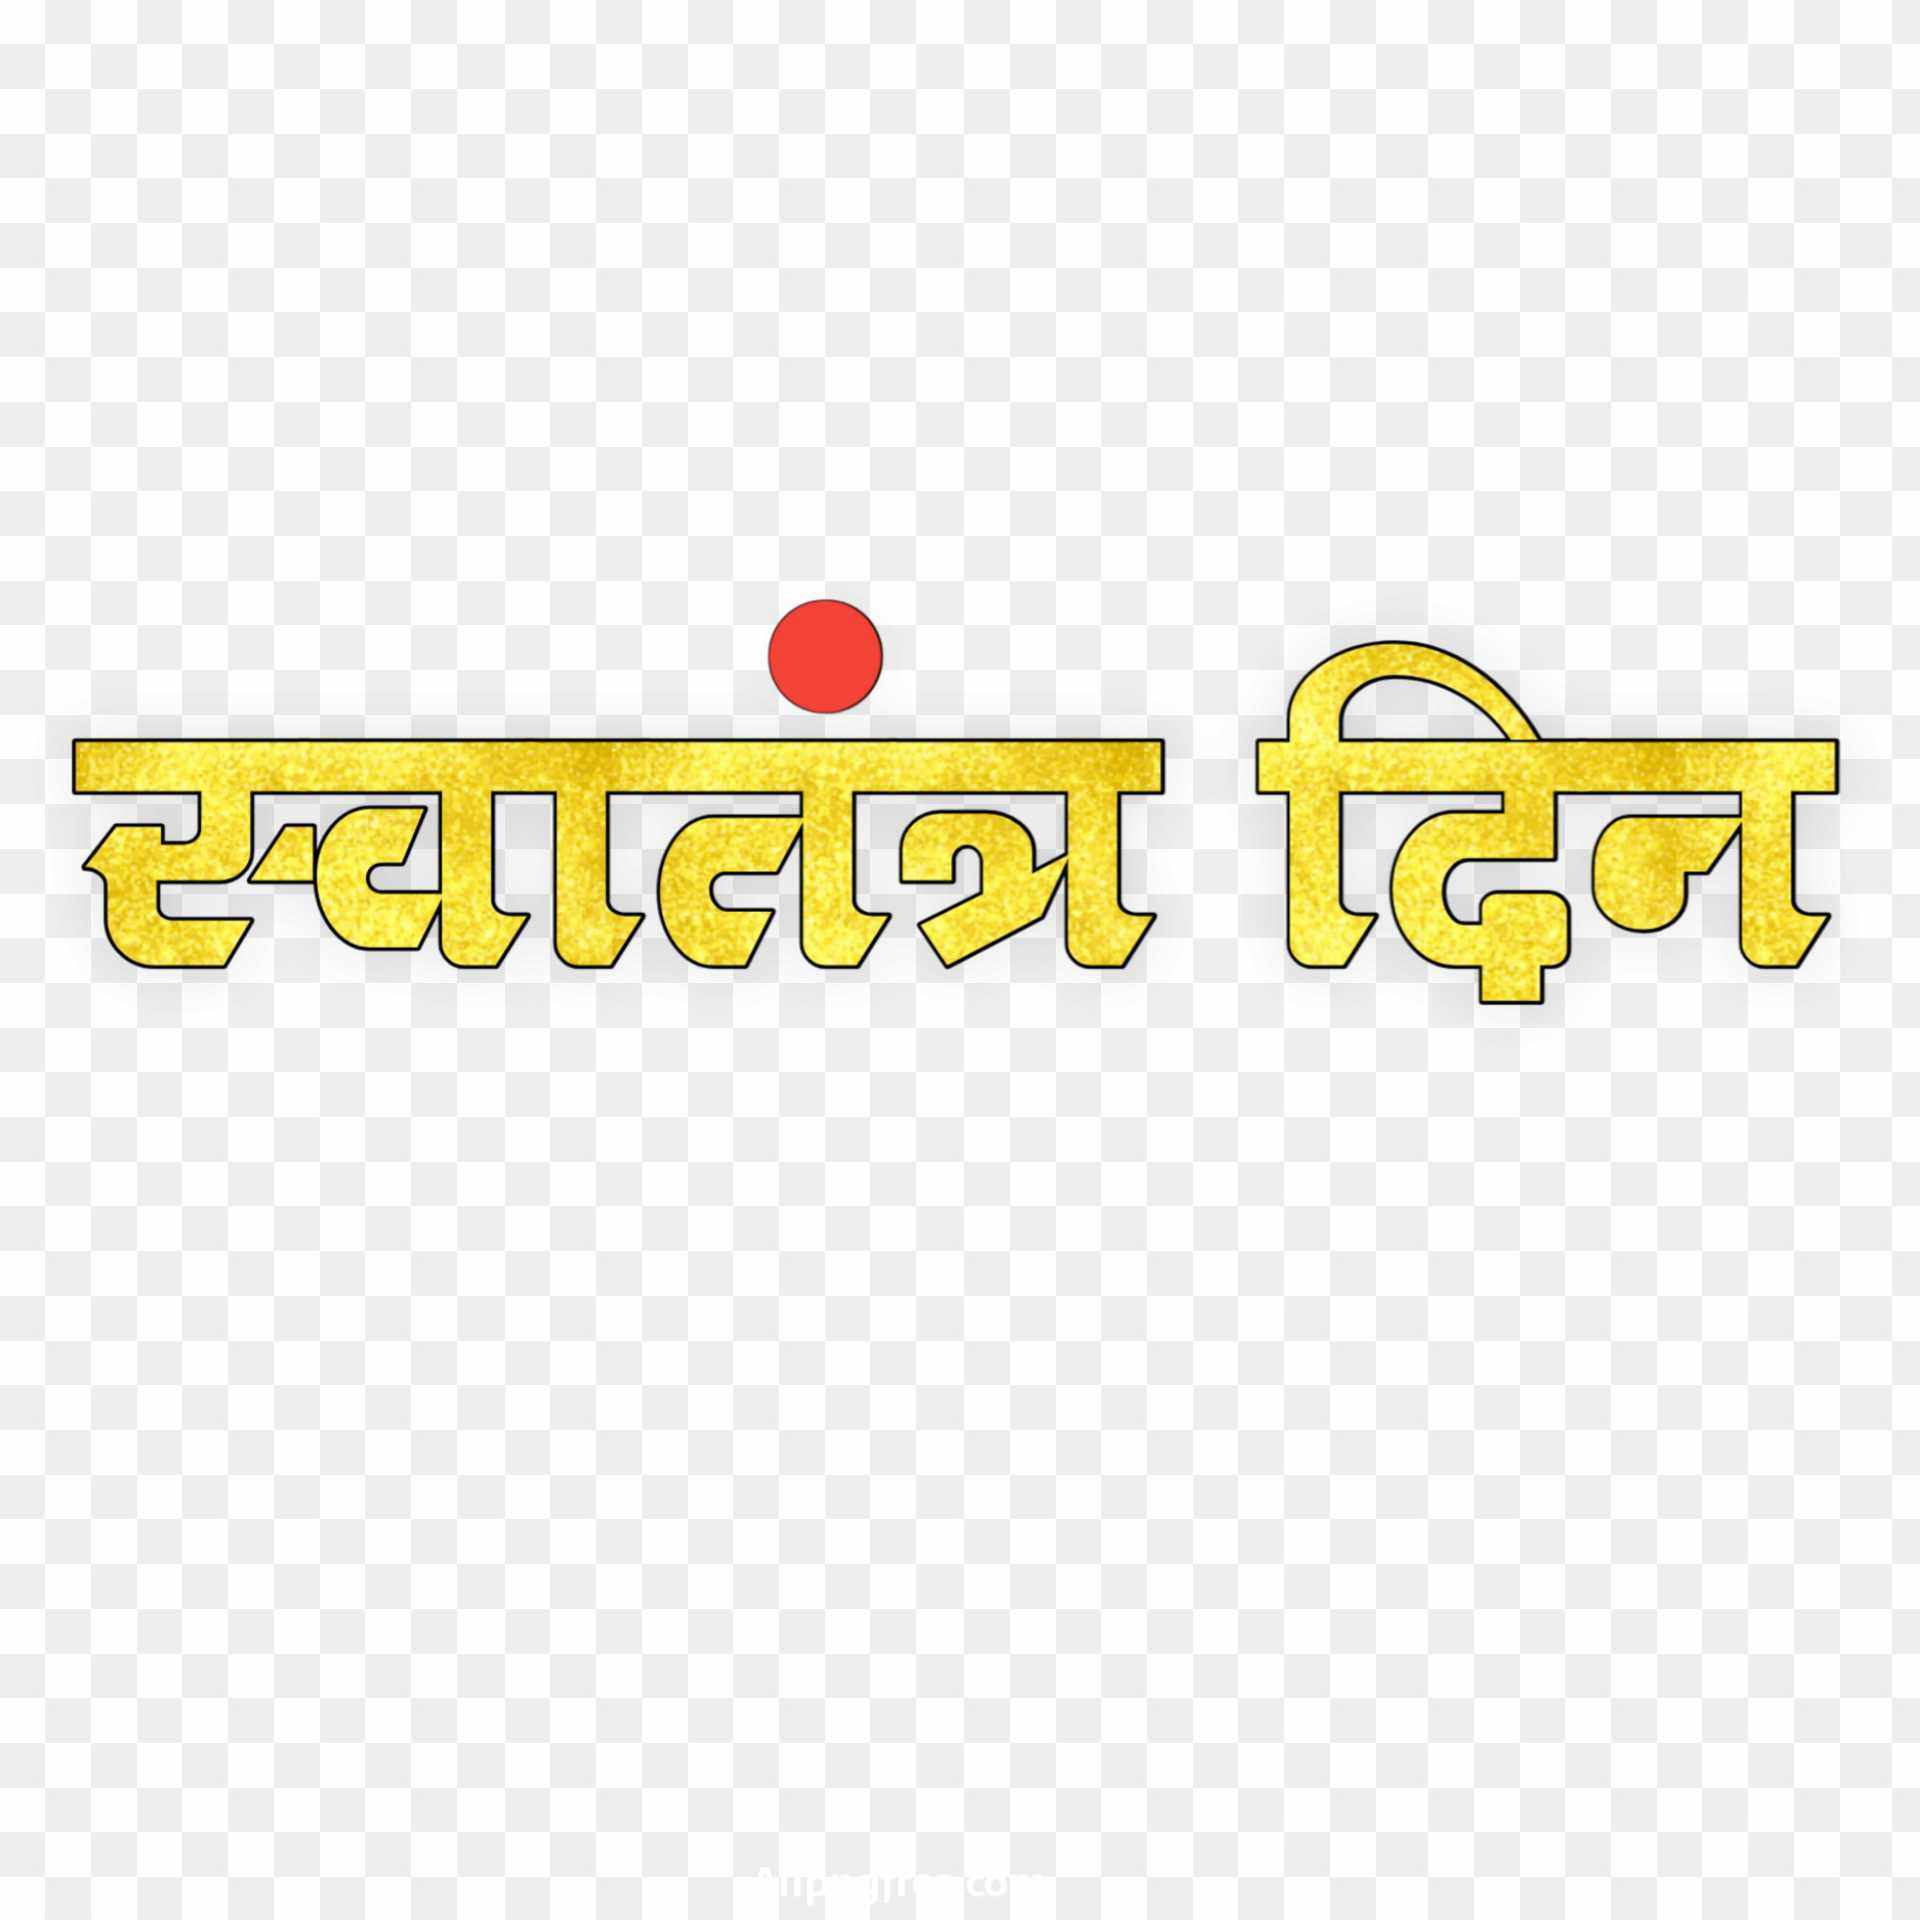 Swatantra Din text PNG images download 